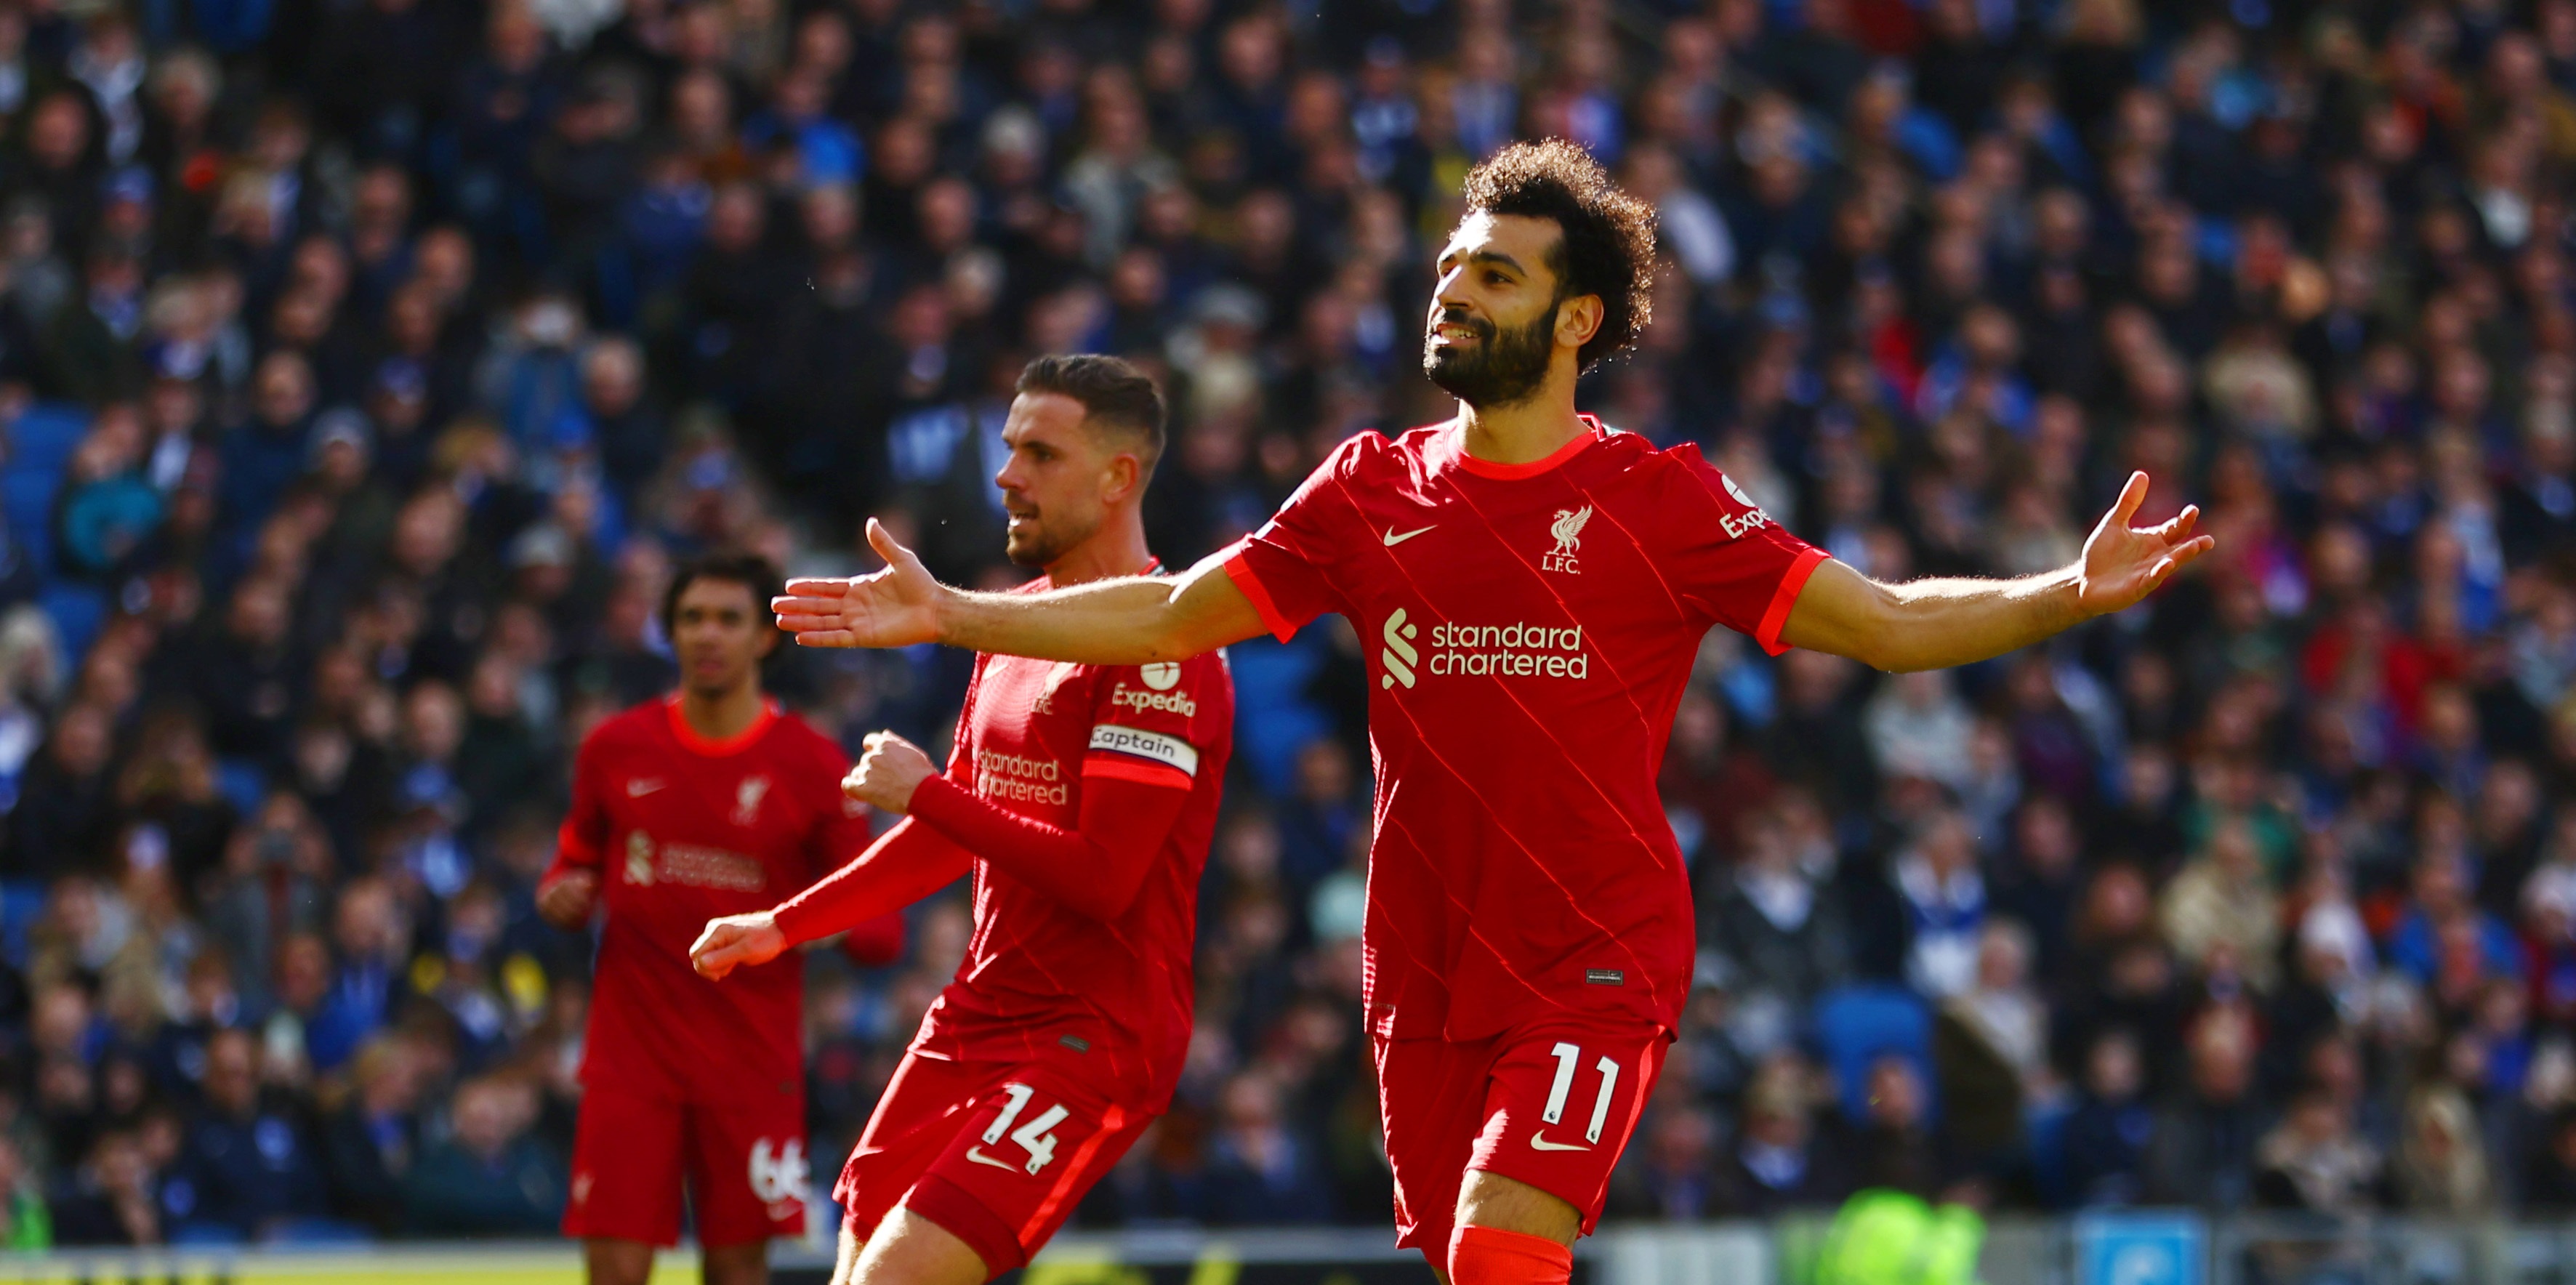 ‘It’s an easy answer’ – Mo Salah reveals everyone at Liverpool wanted Real Madrid clash and weighs in on his Ballon d’Or hopes